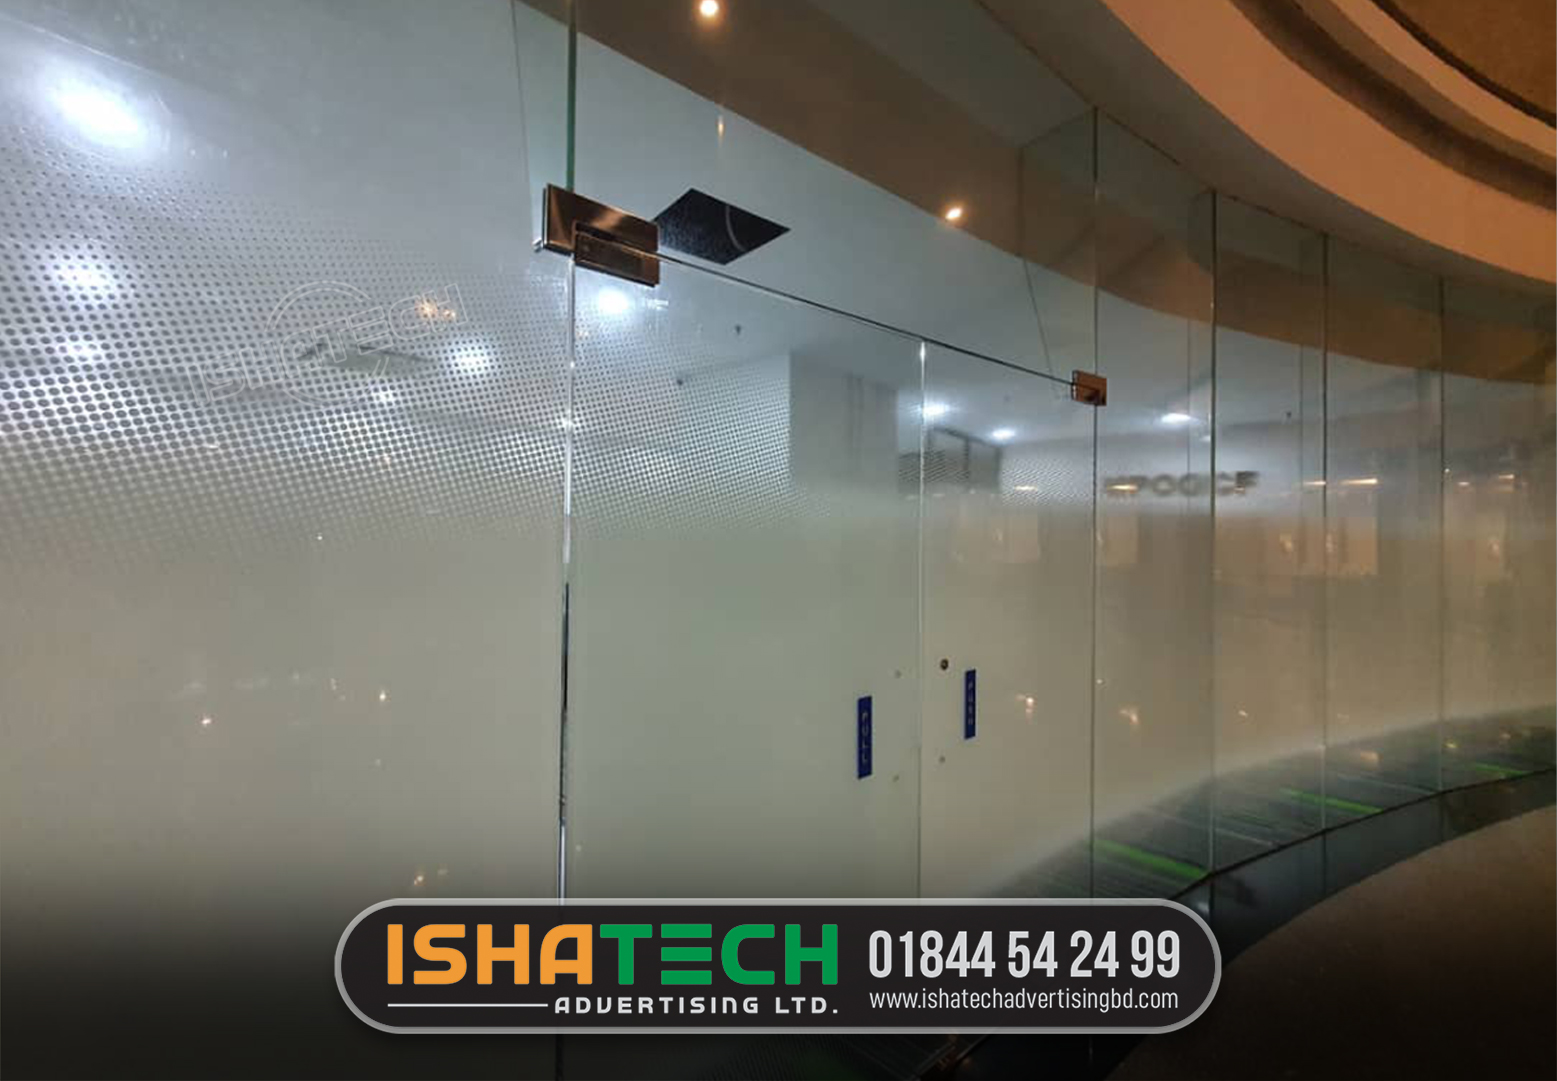 Frosted glass sticker price in bangladesh glass paper price in bangladesh frosted glass paper design frosted glass paper glass sticker design modern glass sticker design glass paper design in bangladesh